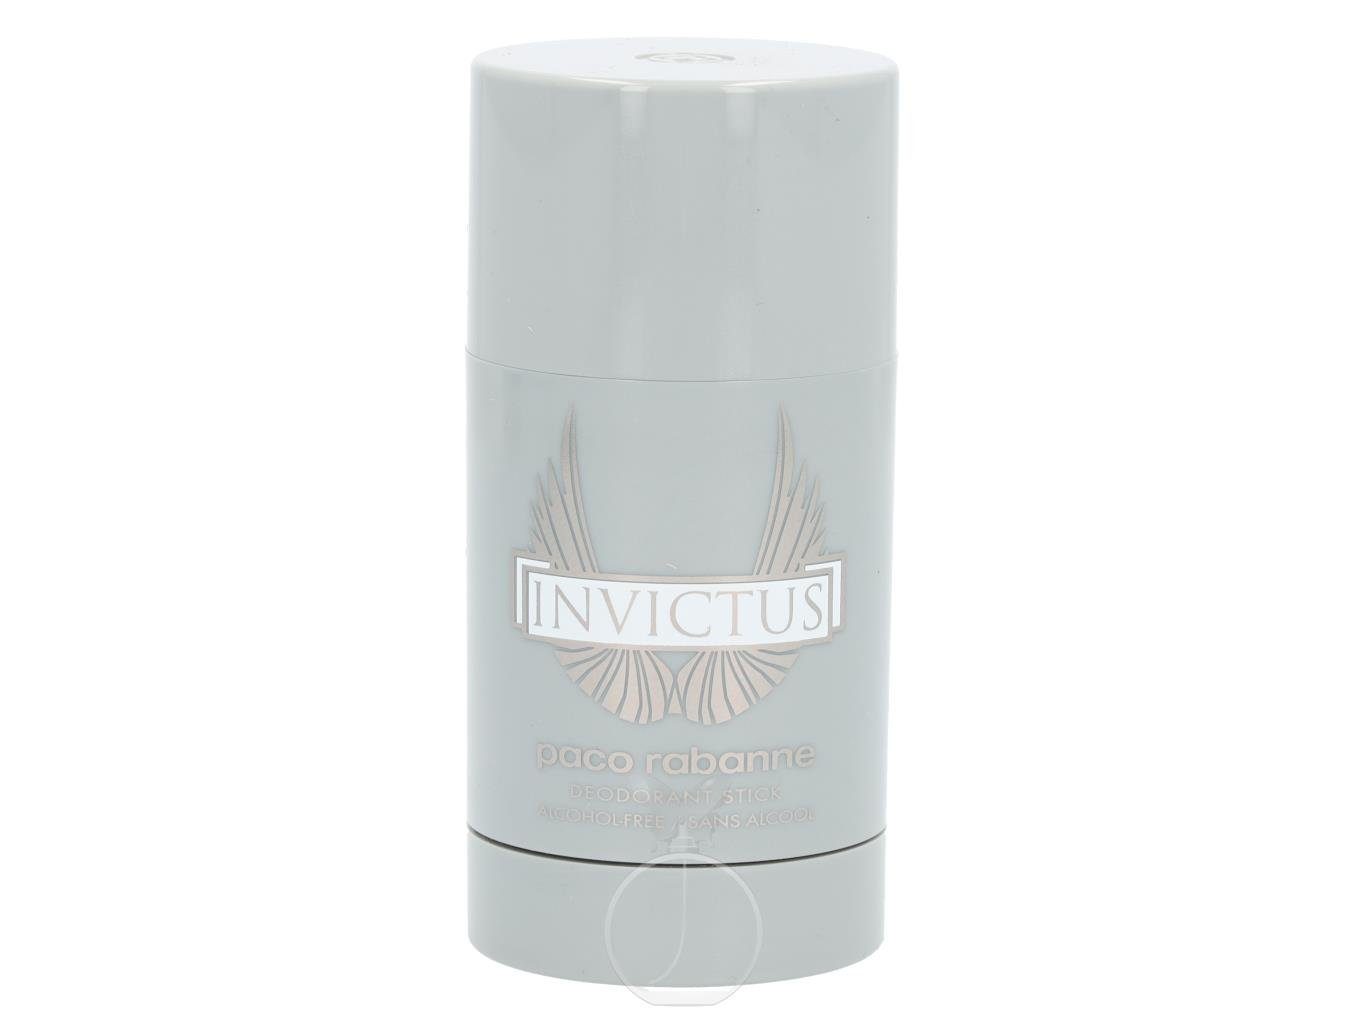 75 Deostick Invictus ml, rabanne Packung paco rabanne paco Deo-Stift